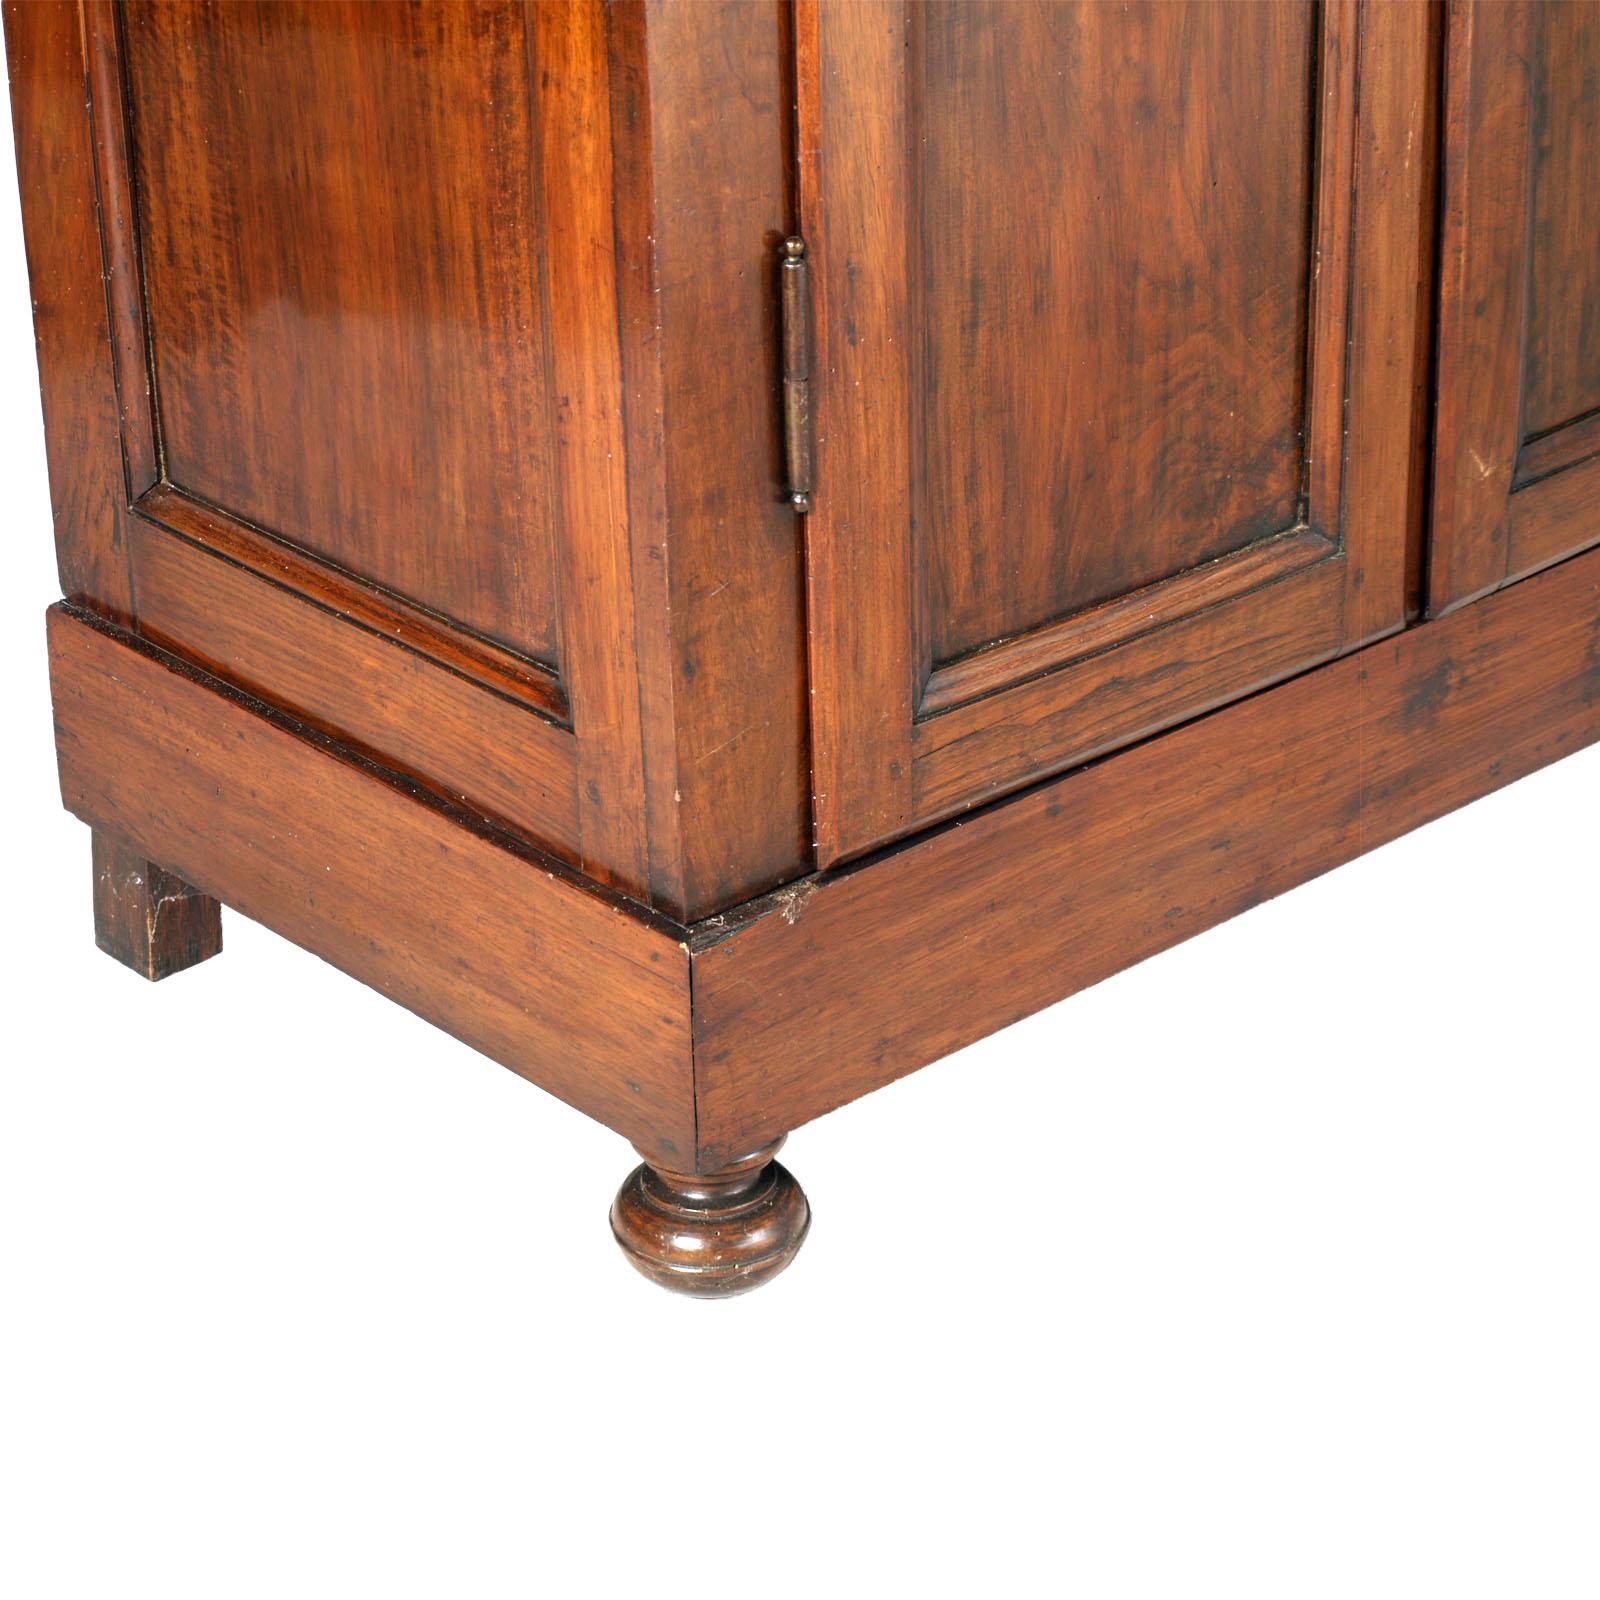 Spectacular antique solid walnut wardrobe that can also be used as a bookcase, completely disassembled. Furniture restored and waxed. Missing any interior shelves and / or sticks to hang clothes that we can supply on request, included in the